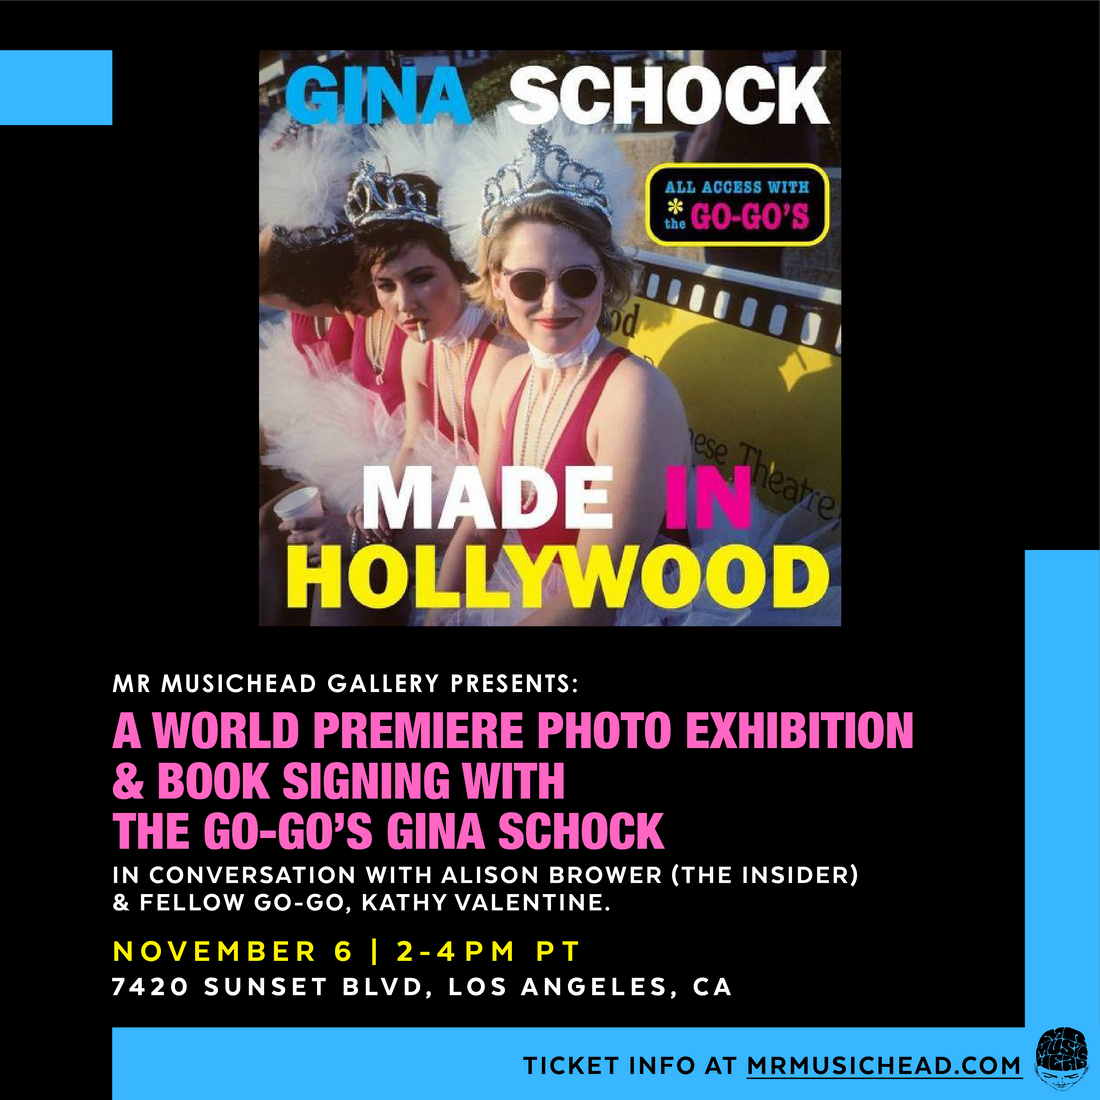 Made in Hollywood by Gina Schock | Author Book Signing & Exhibition